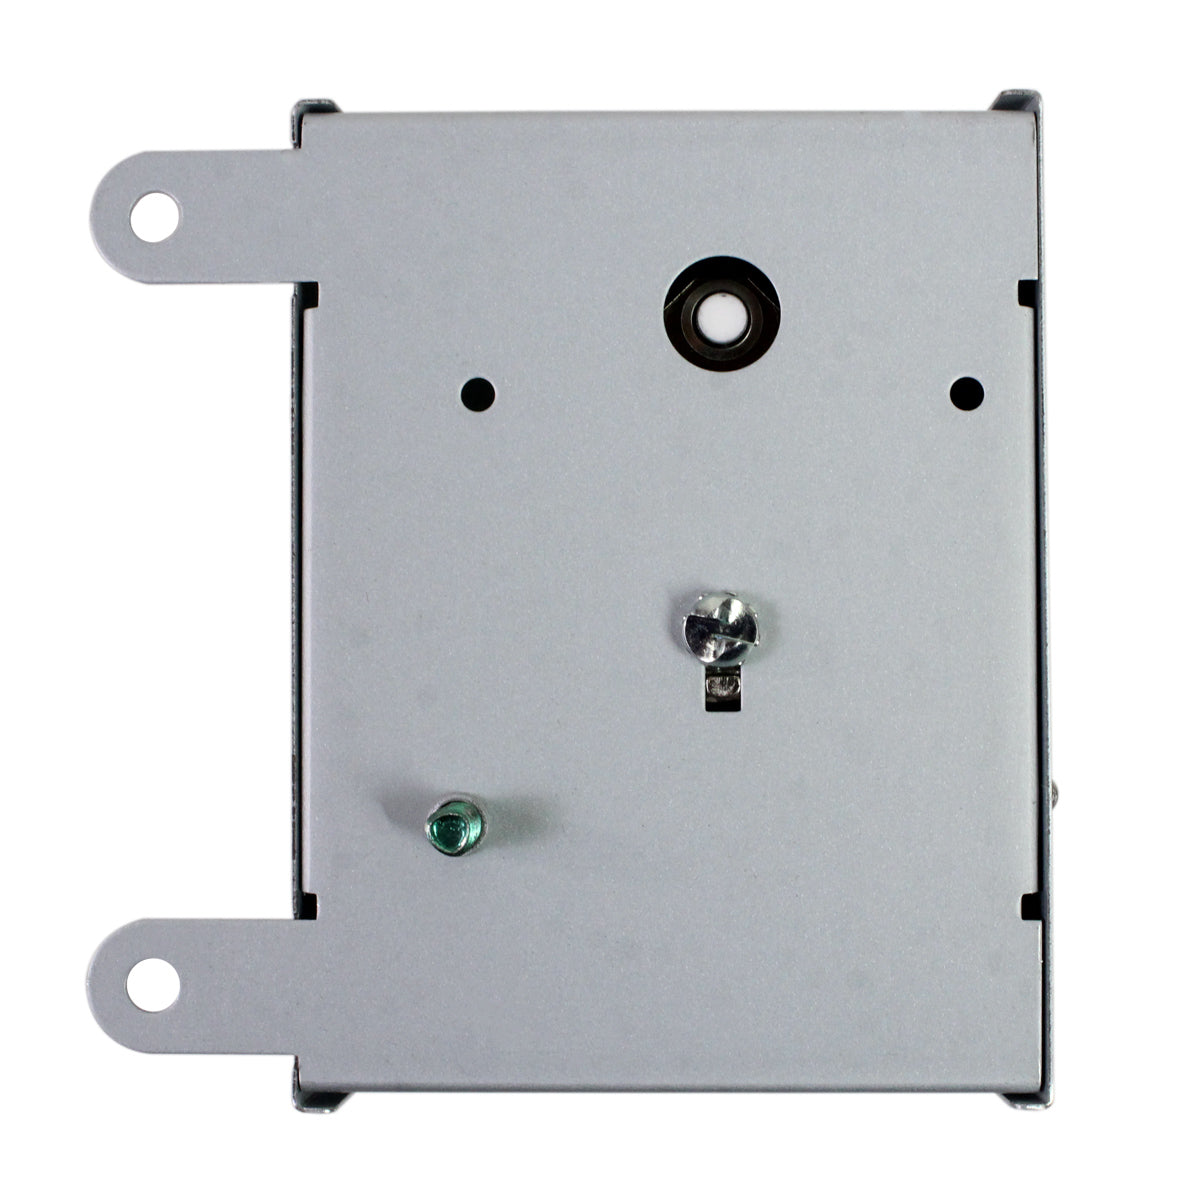 The back of the adjustable thermostat with pre-drilled holes for mounting to a wall or attic rafter.